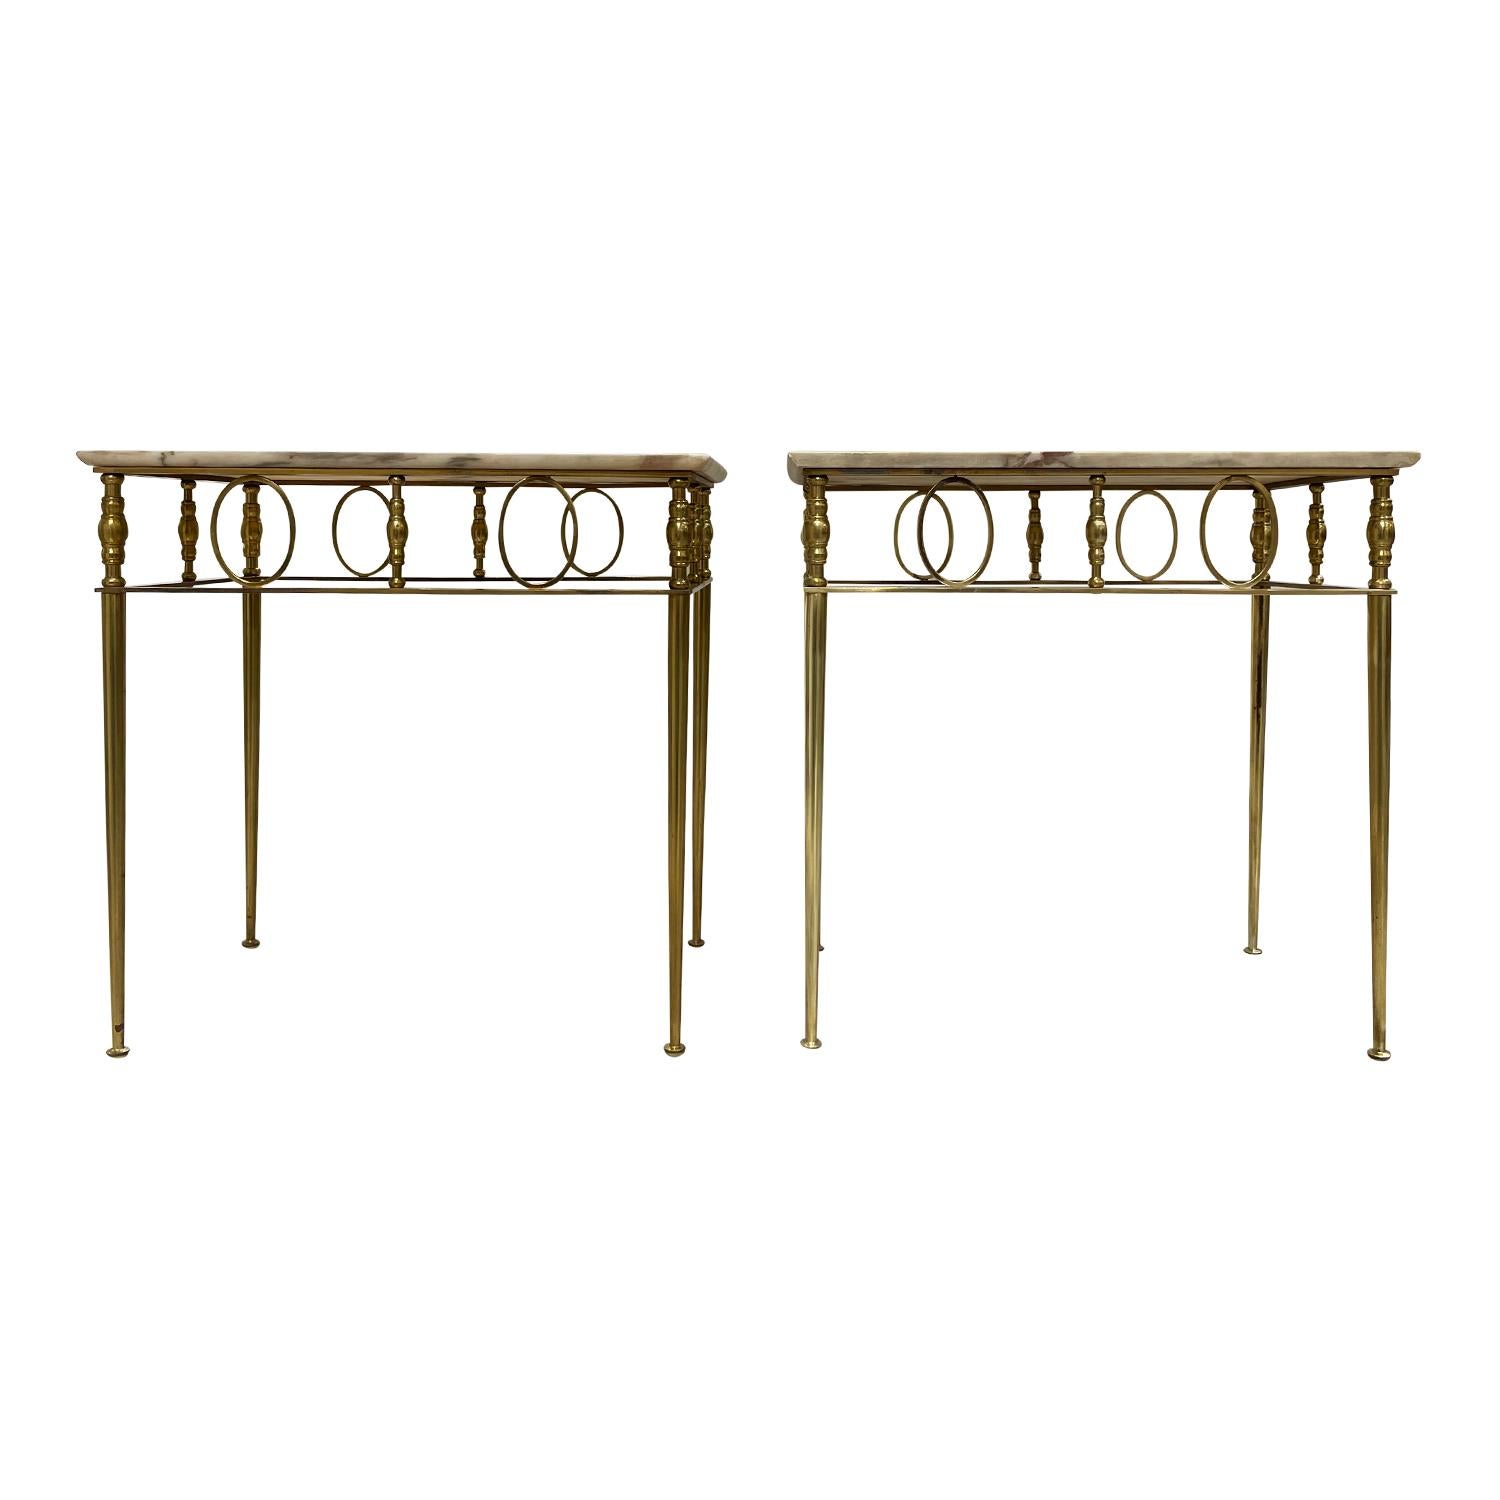 A gold, vintage Art Deco French pair of side tables made of hand crafted polished brass with a cream-white marble top, in good condition. The small Parisian sofa tables are standing on four thin round legs, enhanced by detailed décor. Minor